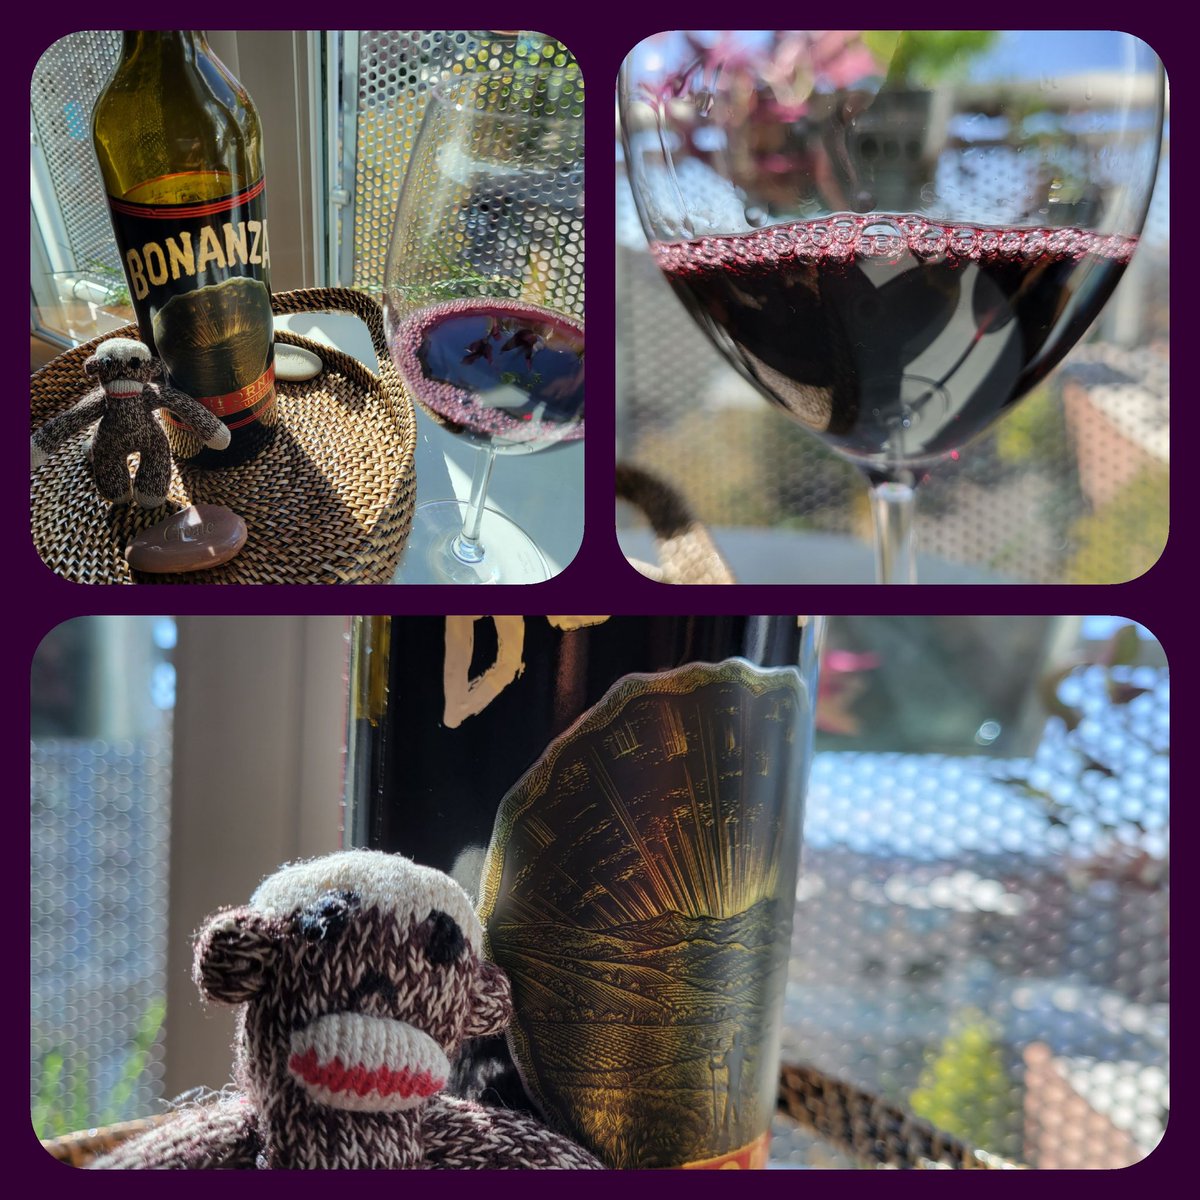 I am chillin this afternoon. We got Bonanza from @caymuscab ... I like it alot! Cheers Chuck!
#wine #winetime #wineprotocol  #WineWednesday #wineoclock #chillinwithTM2 #TM2Verified ✅️🐒